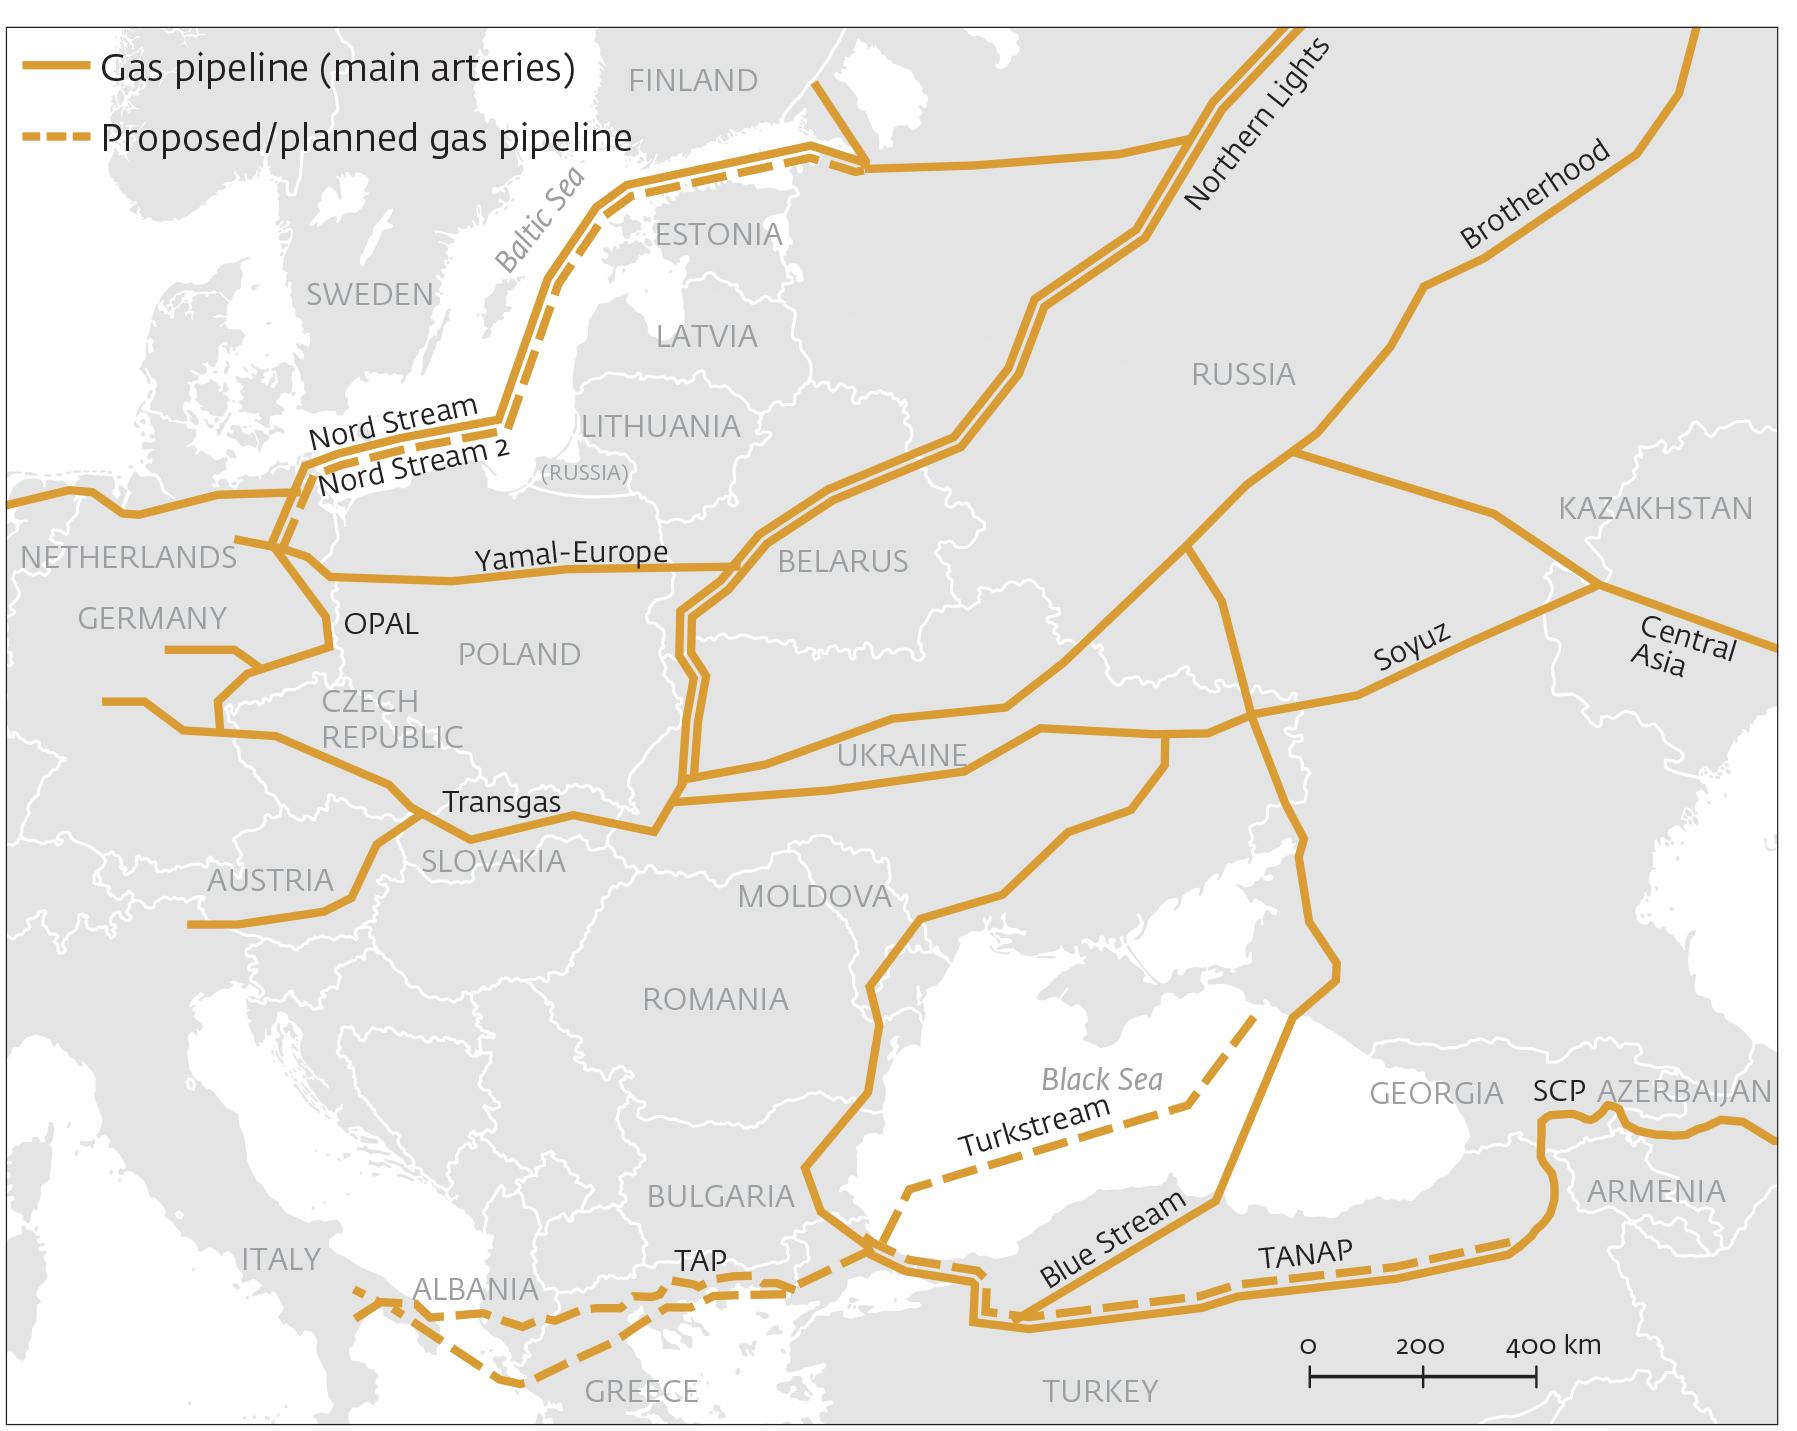 Europe´s gas pipeline ties to Russia.